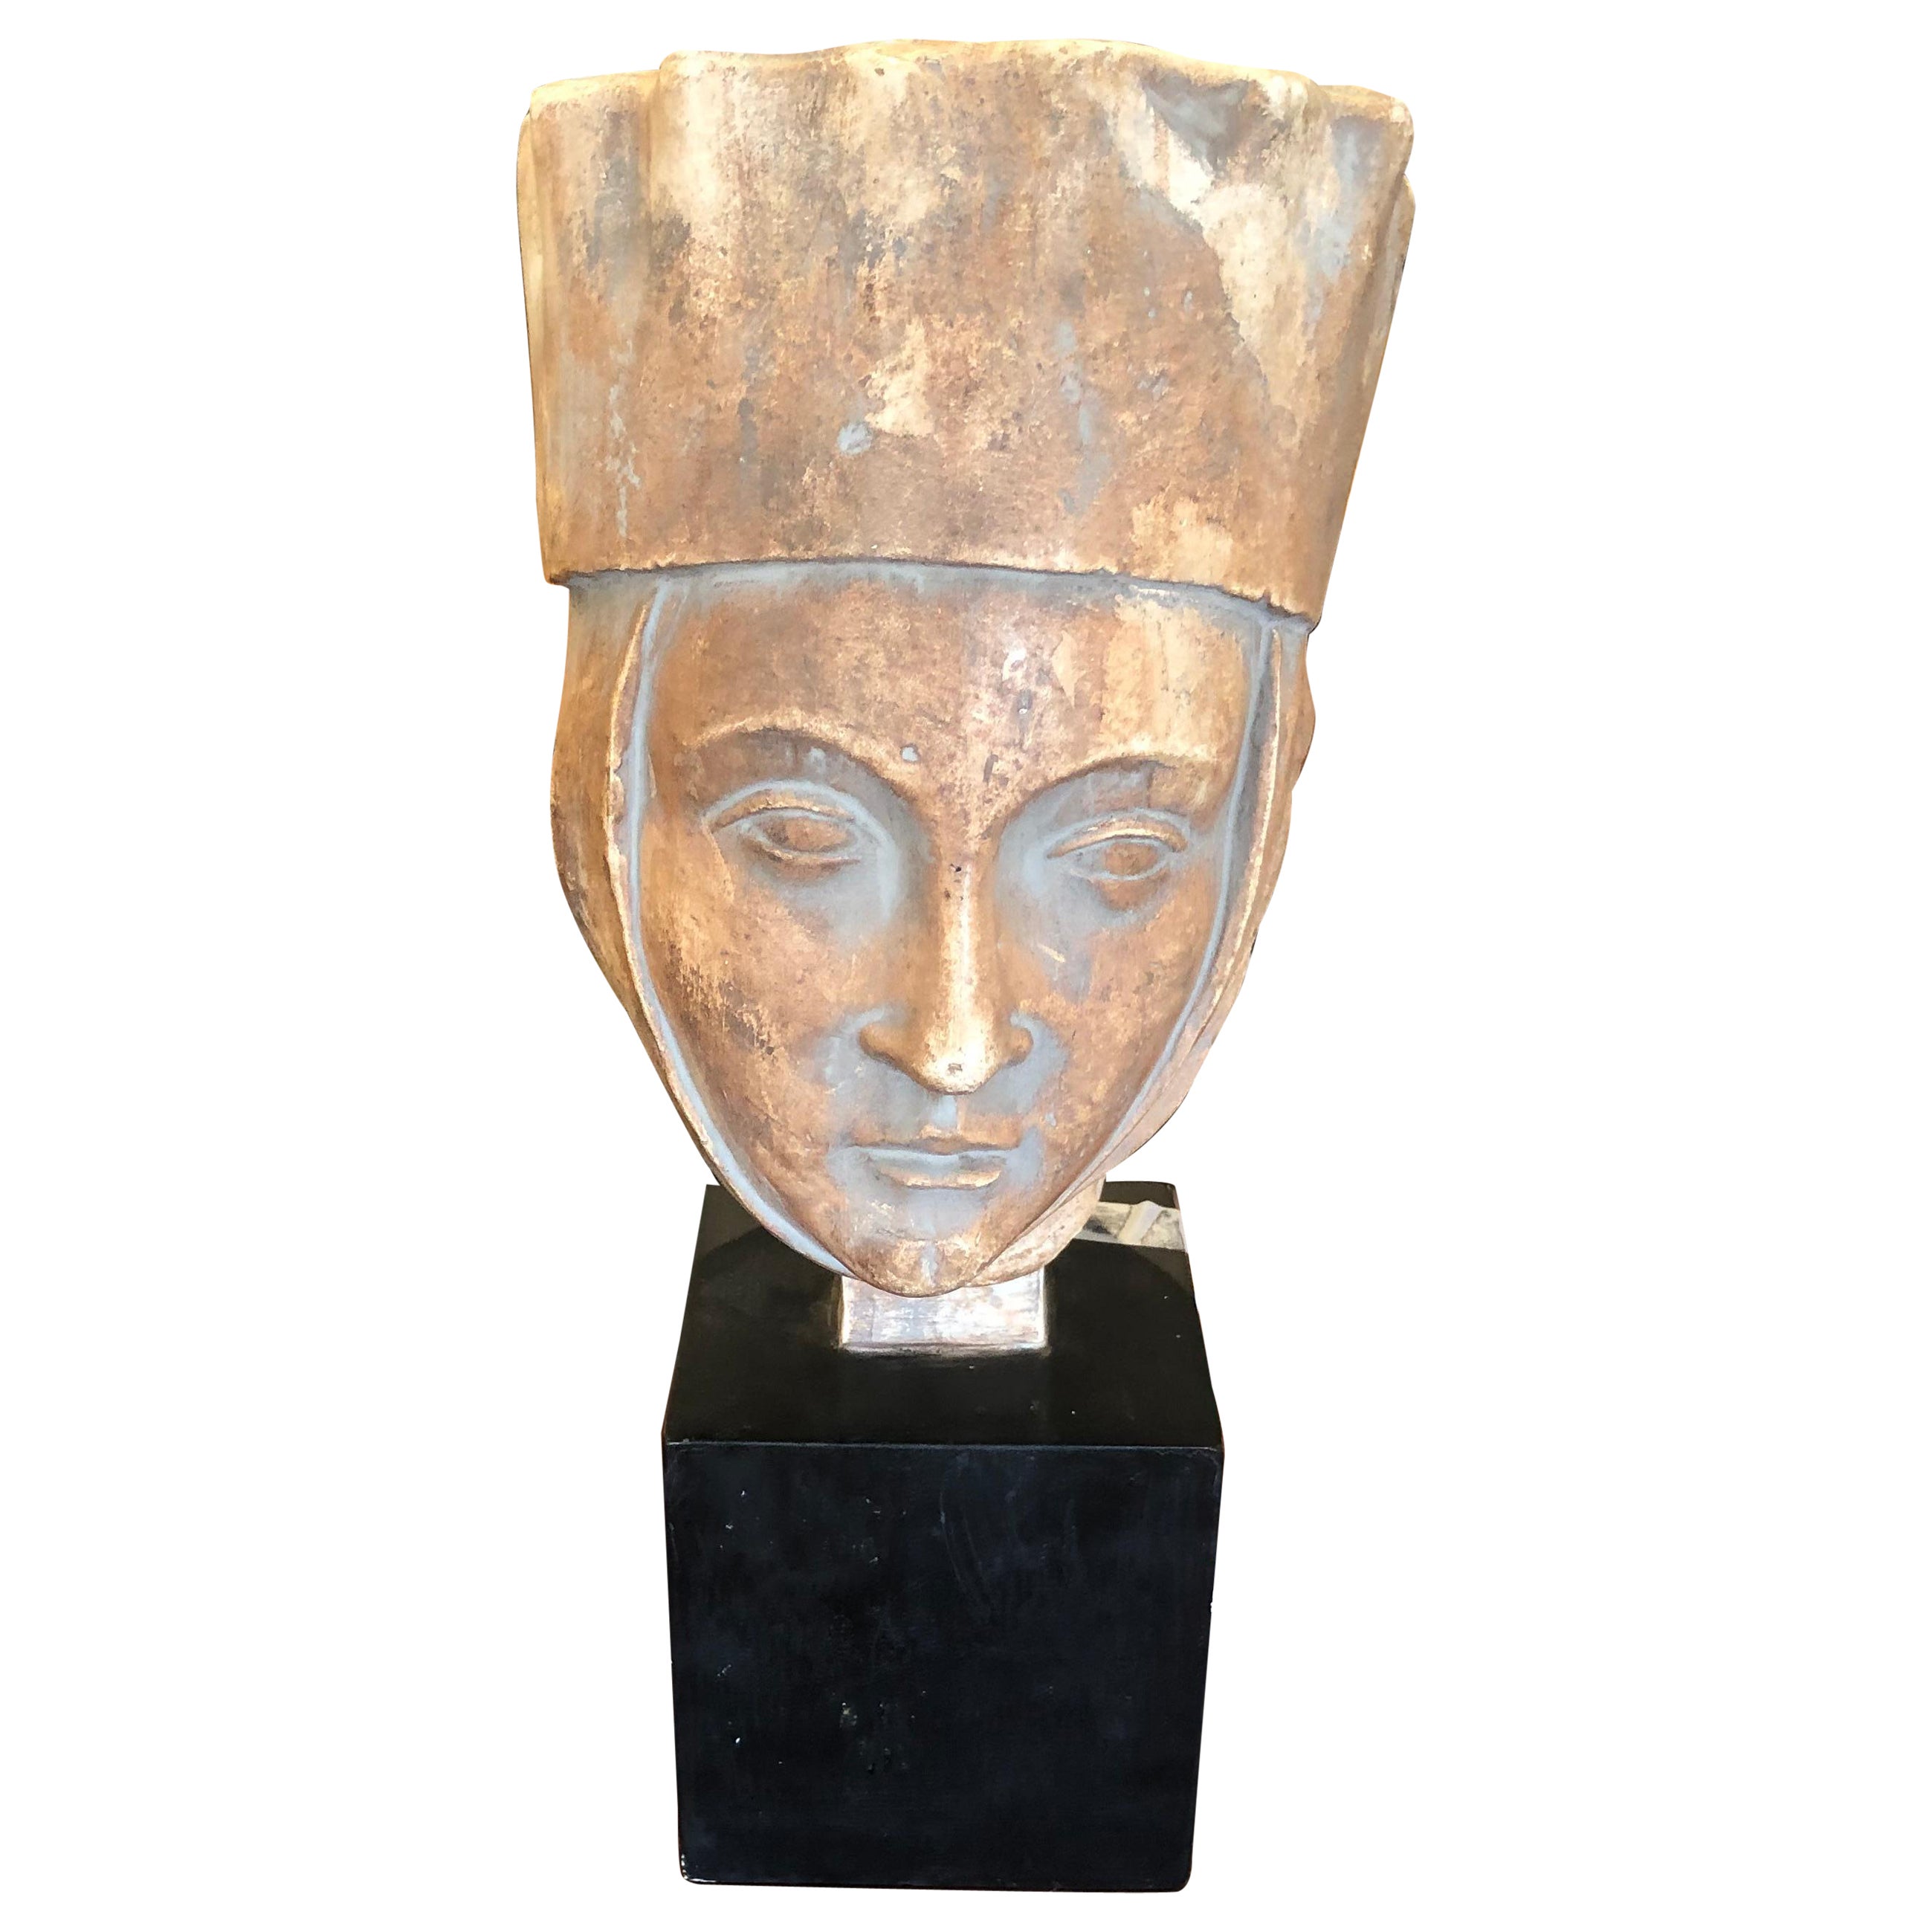 Striking Female Bust of Saint or Princess on Black Cube For Sale